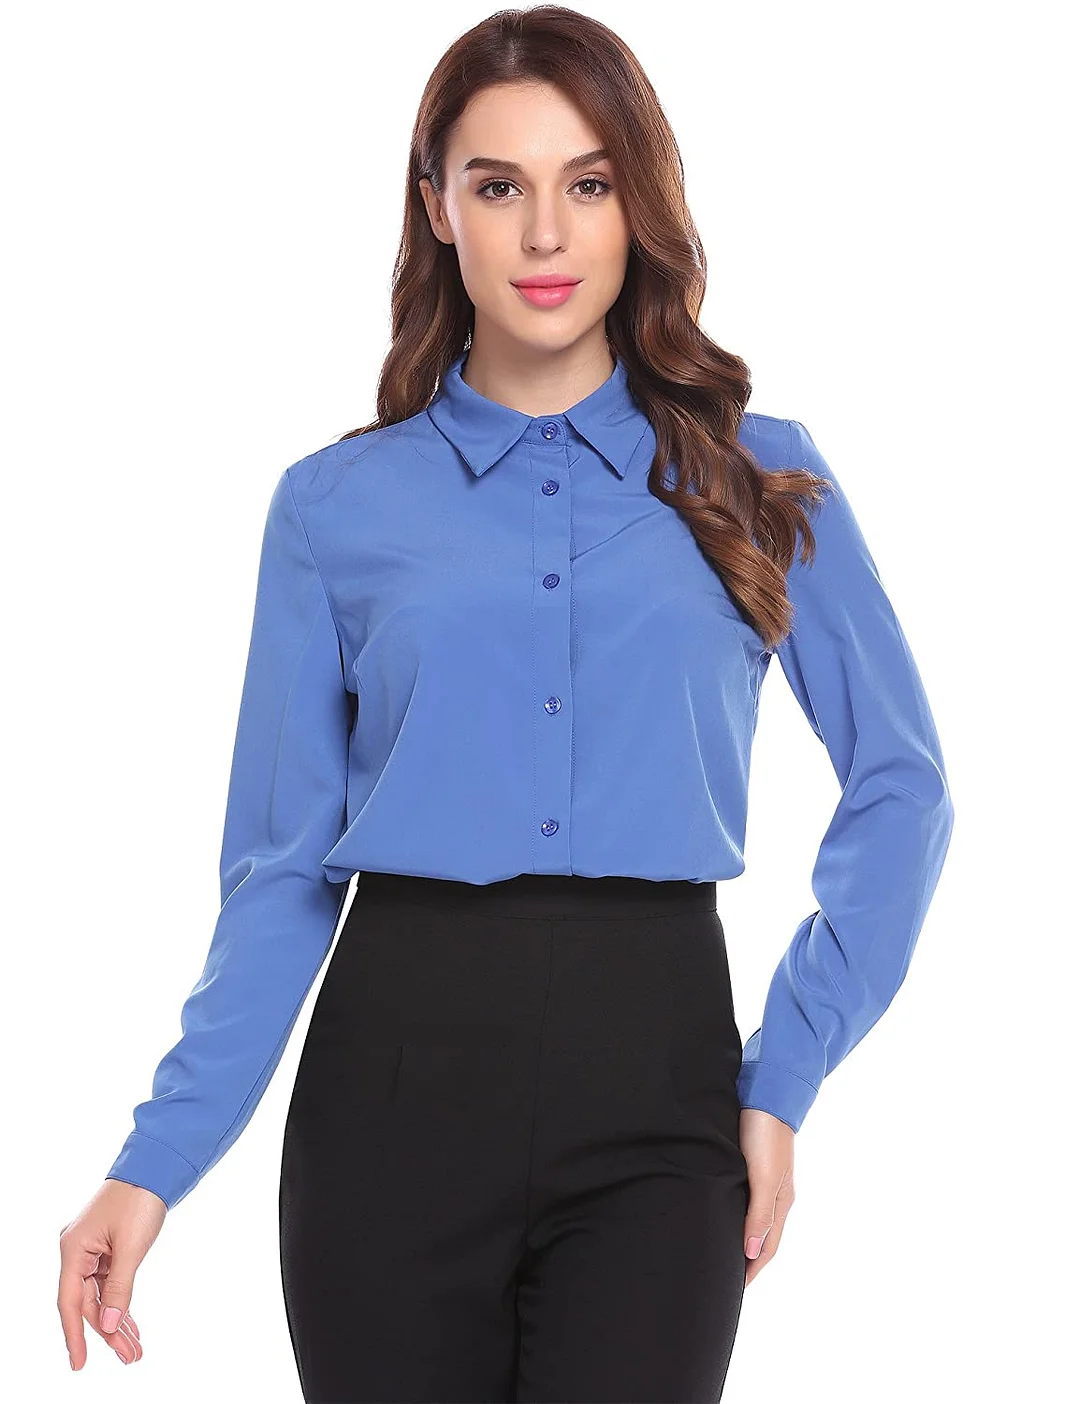 Womens Long Sleeve Office Work Cotton Blouse Button Down Shirts Tops